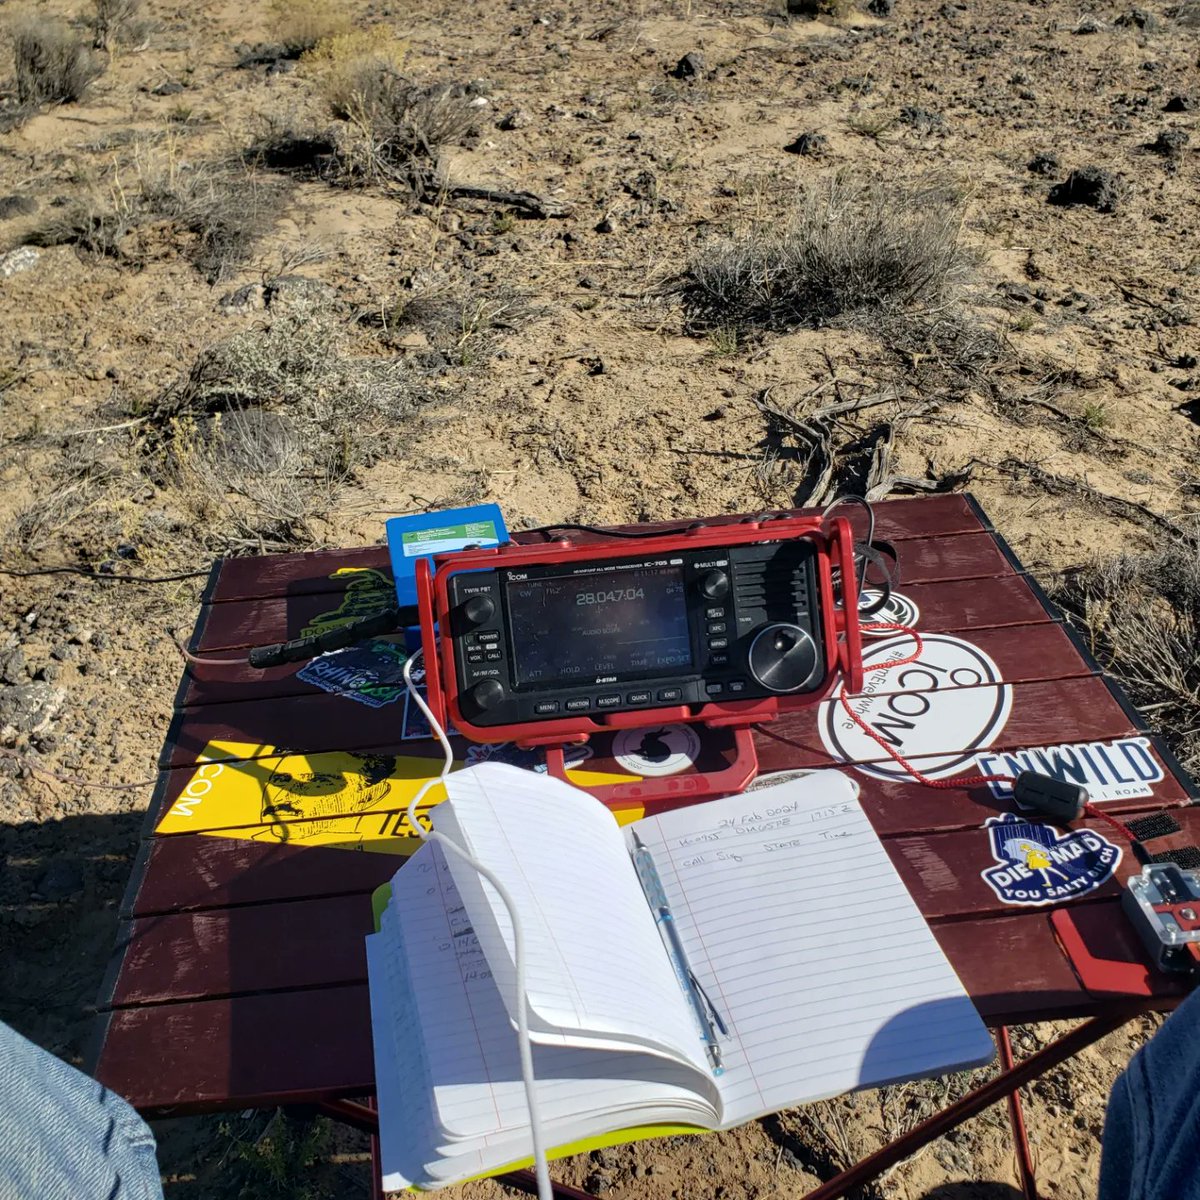 I'm always amazed at how far you can reach with a radio on 5 watts.
#parksontheair #hamradio #morsecode #CW #icomic705 #IC705 #Icom #PetroglyphsNationalMonument #NewMexico #NewMexicoTrue